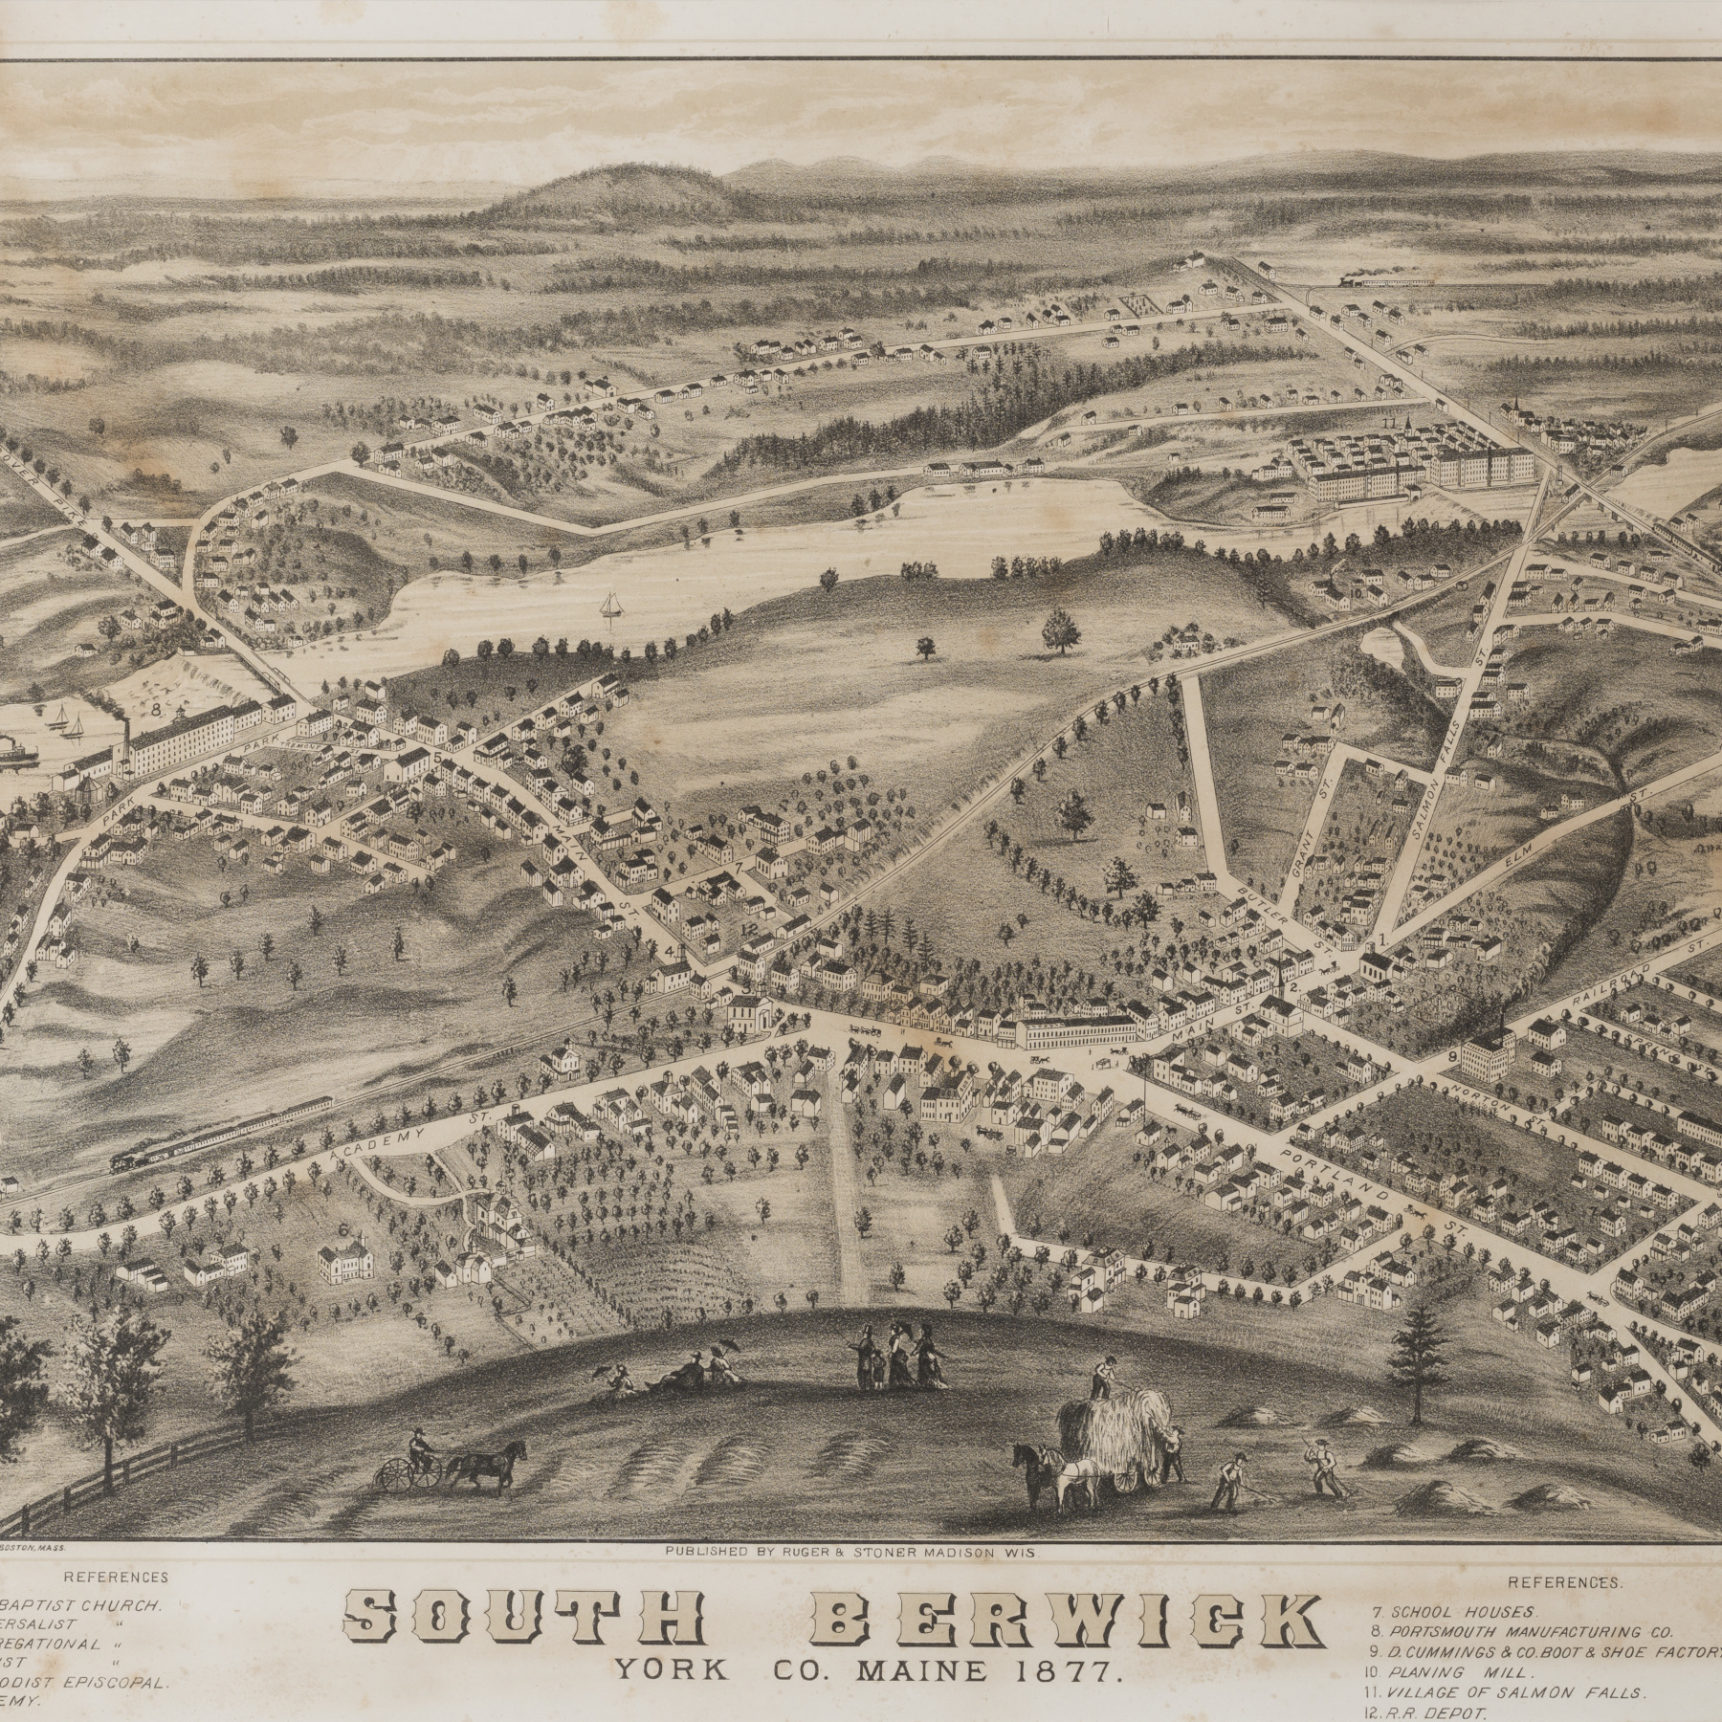 Map showing town of South Berwick from above with meticulously drawn and labelled streets, buildings, and natural features.